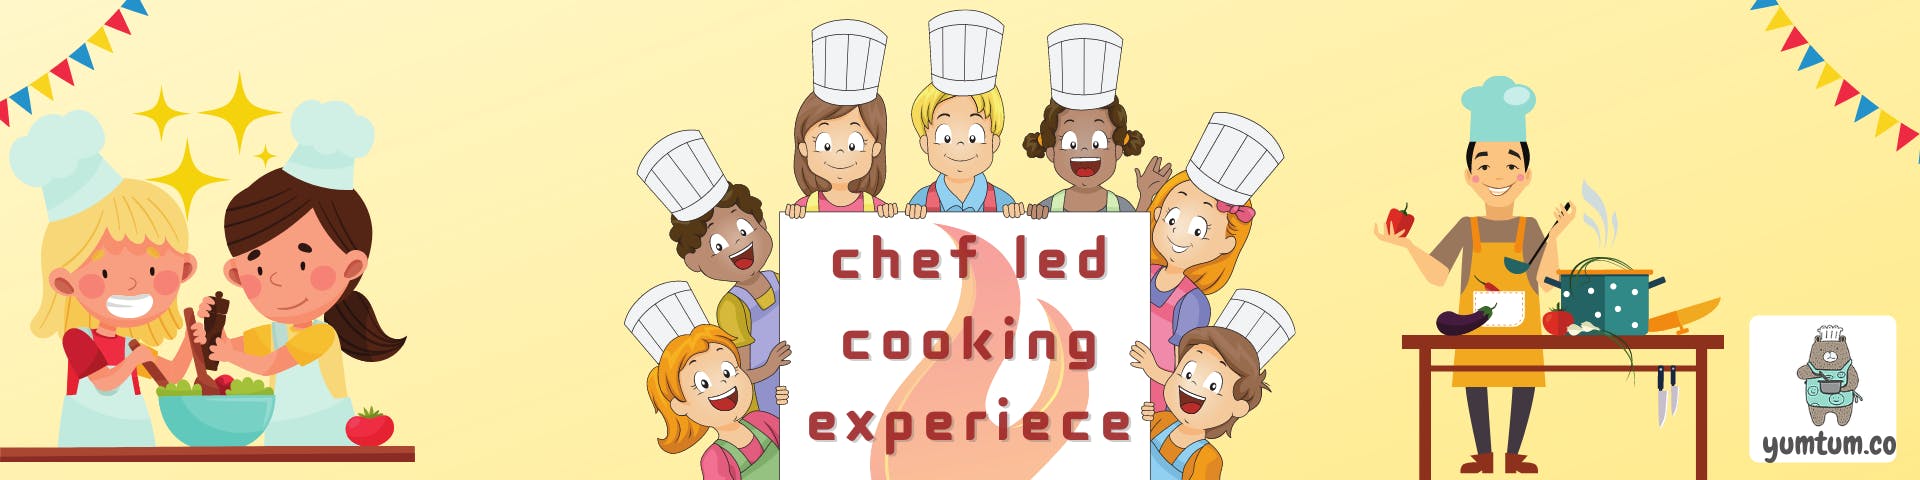 CHEF LED COOKING.png